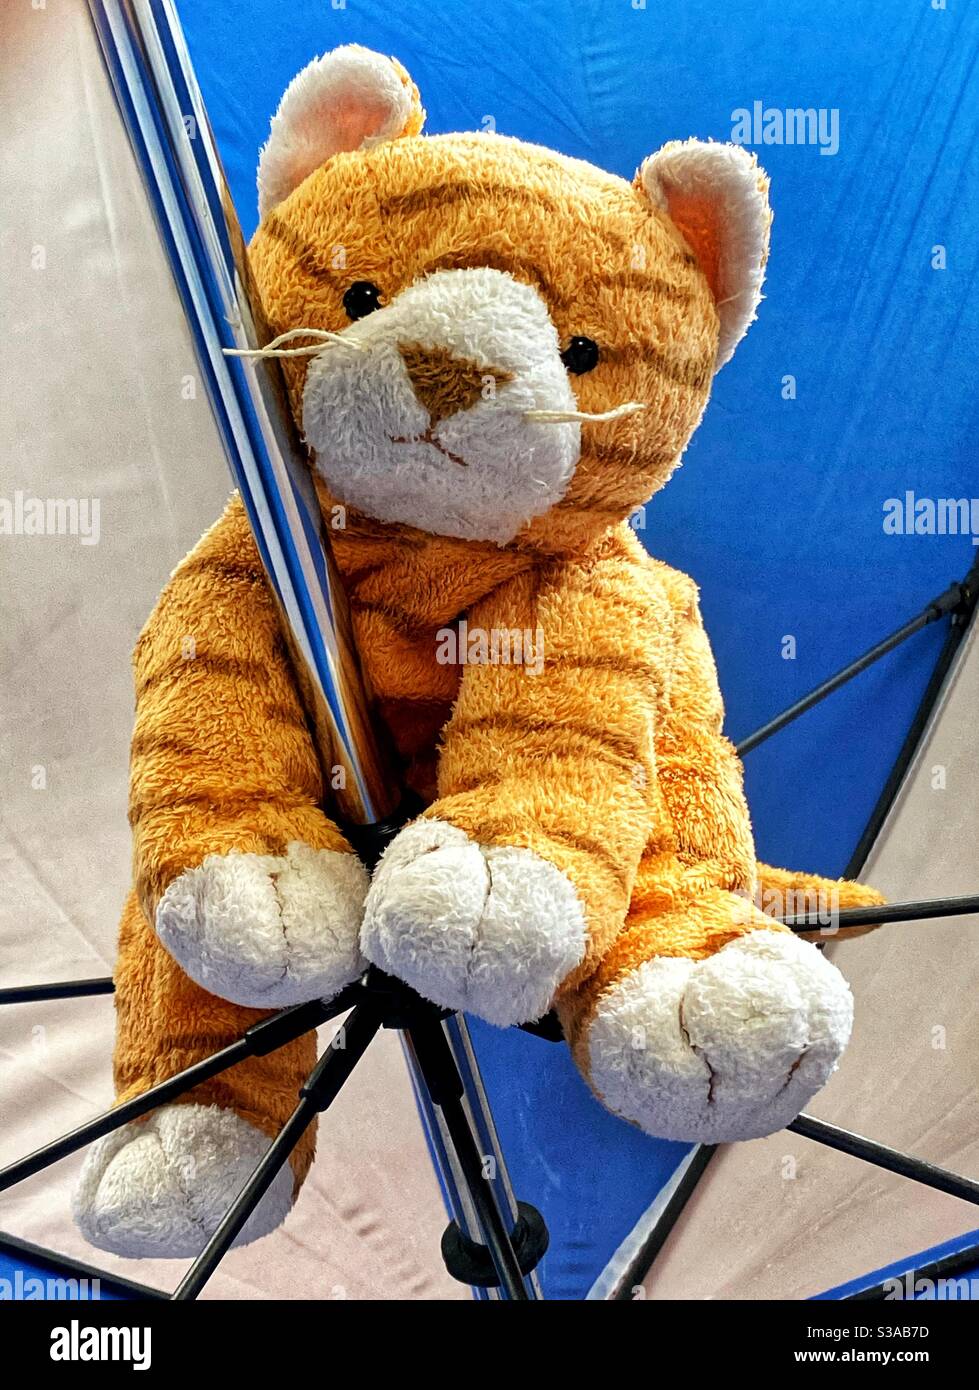 Pole dancing accident: a soft toy tiger grasping the handle of an upturned umbrella Stock Photo